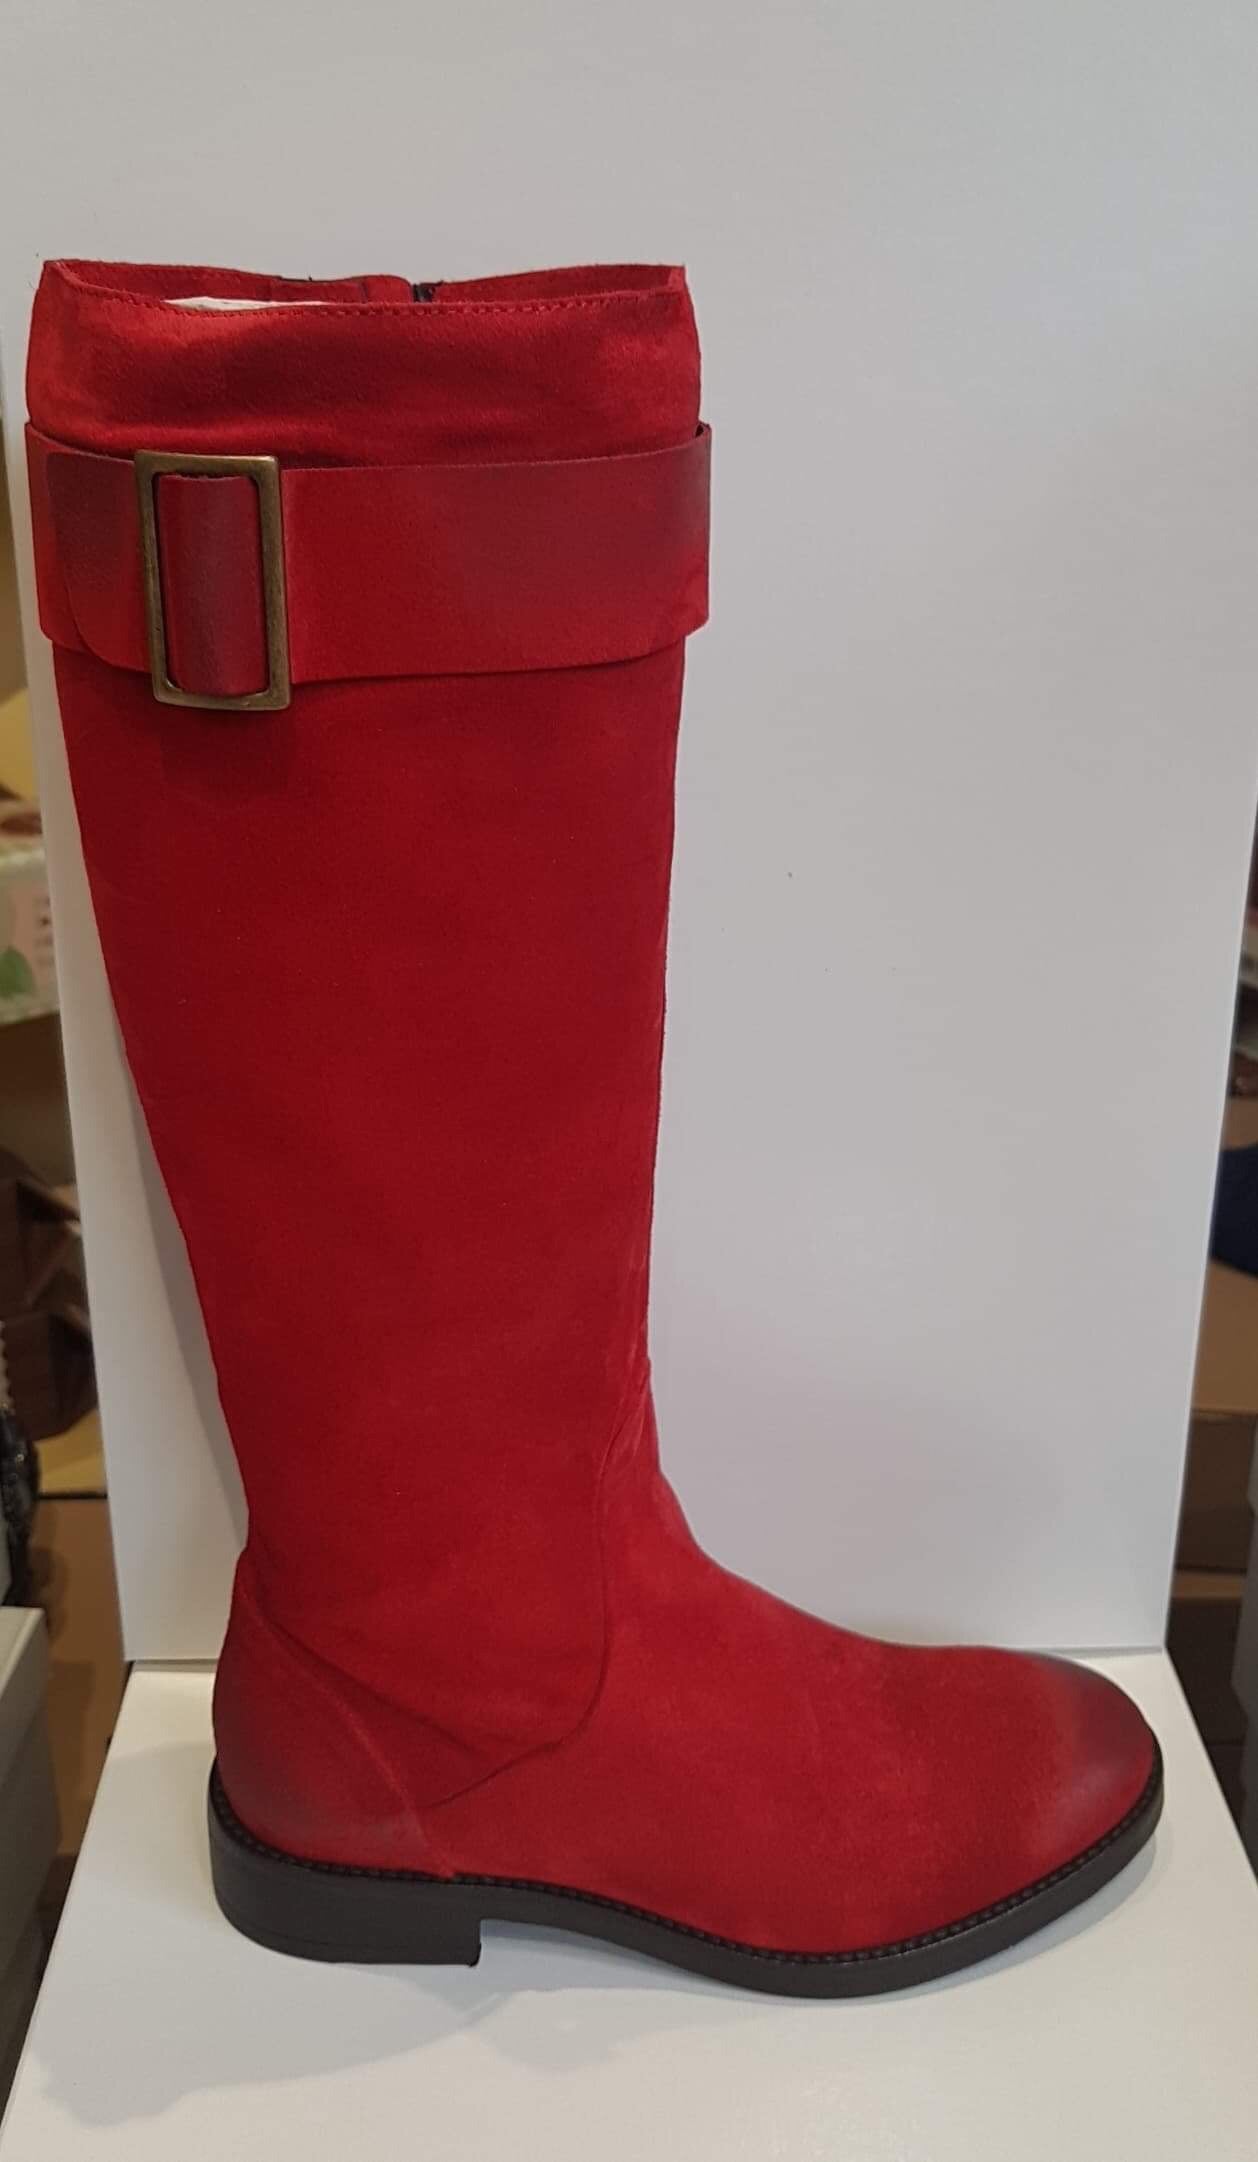 Alisa Bianchini ladies Red boots made in Italy sale now £99